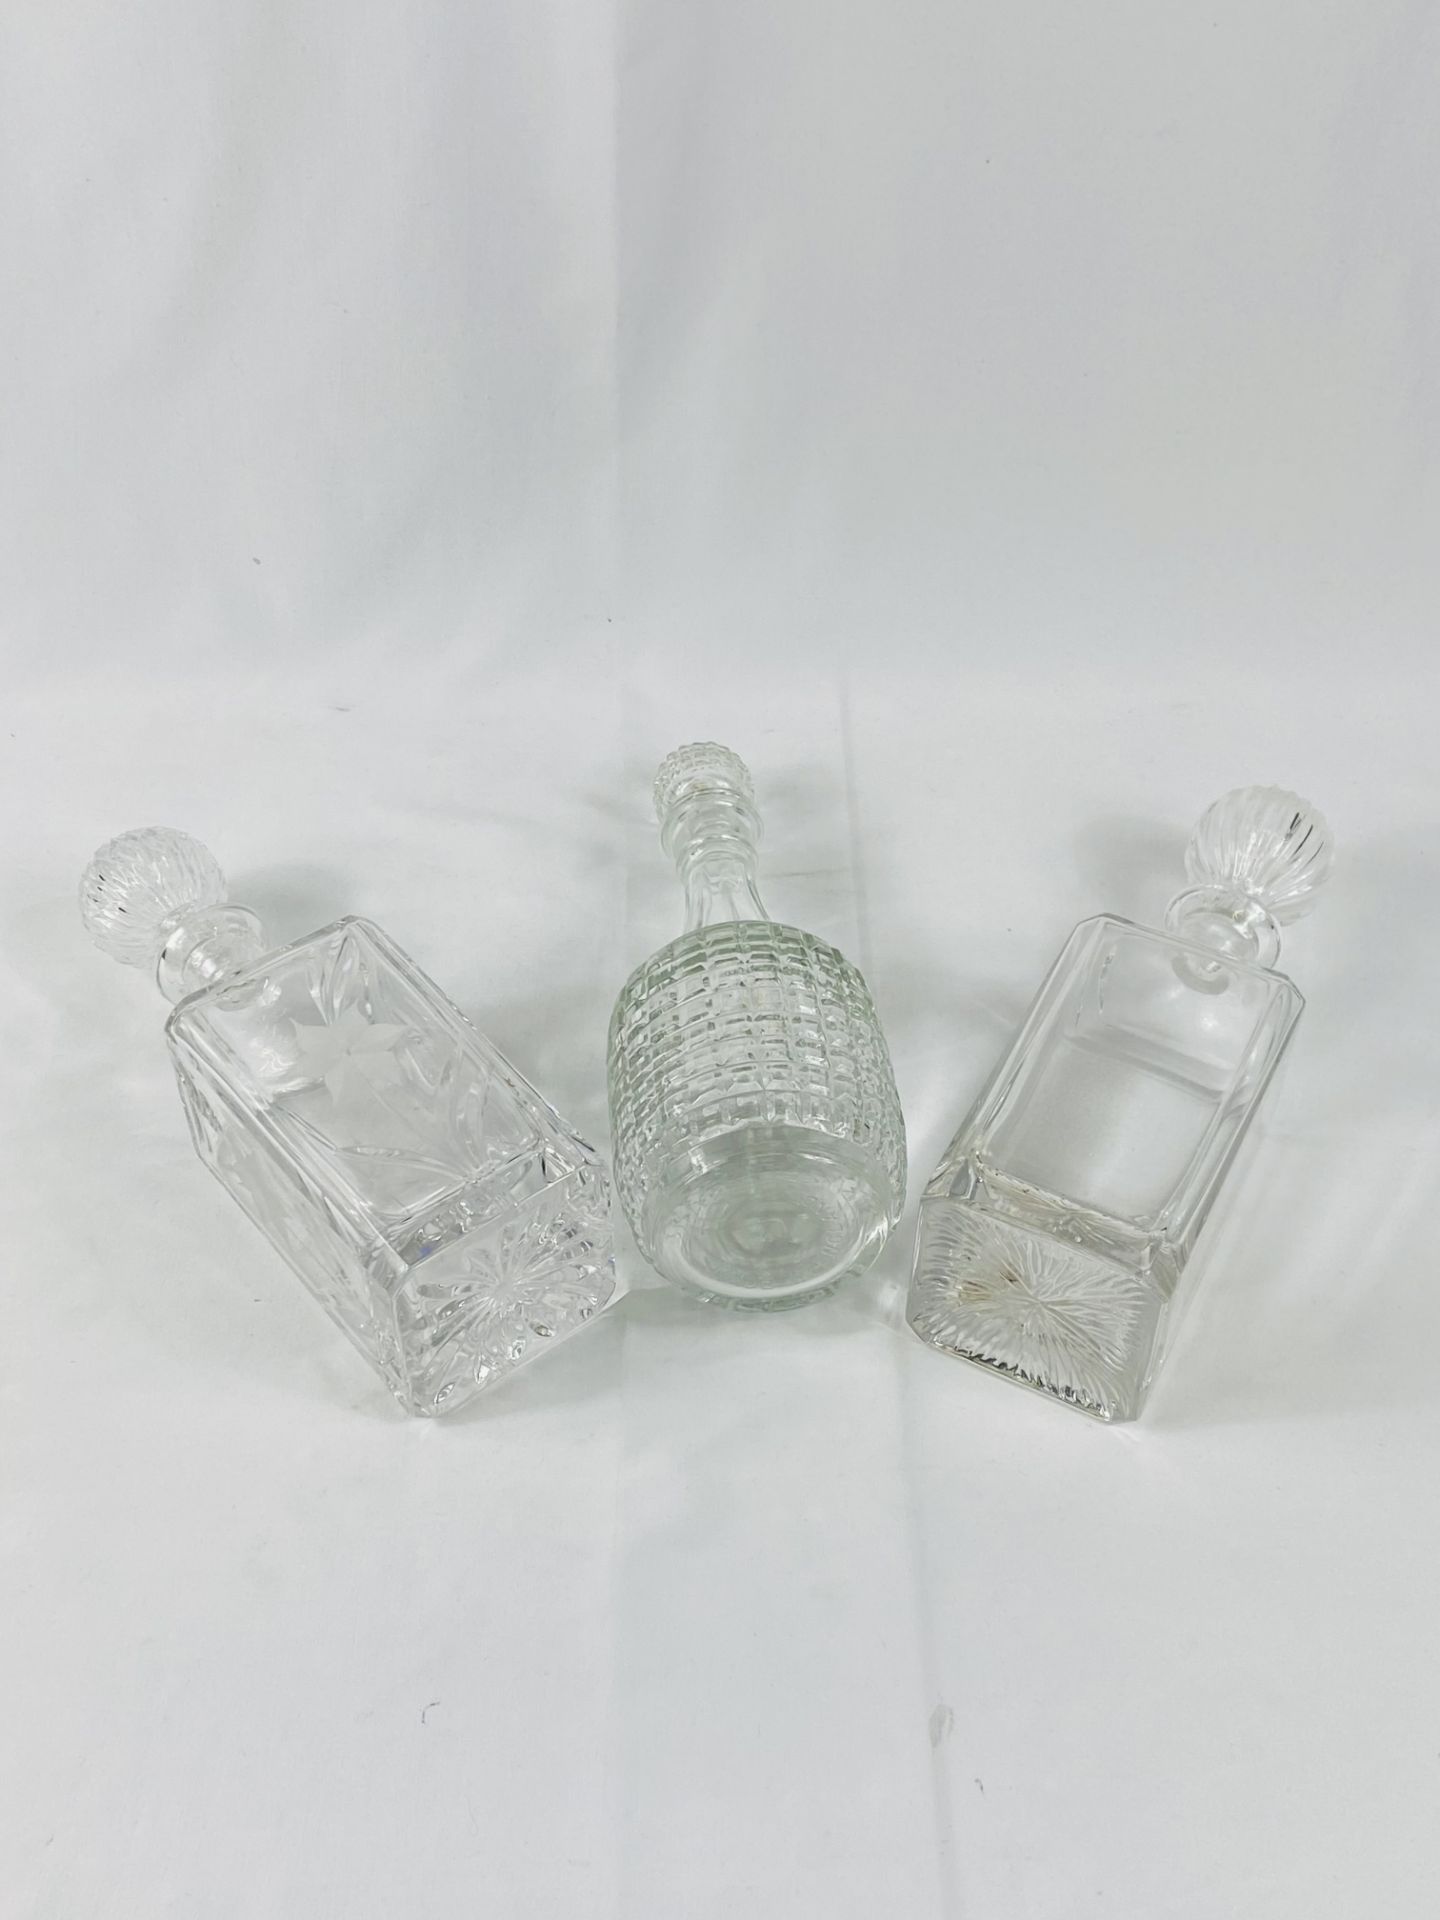 Two cut glass decanters together with a moulded glass decanter - Image 2 of 3